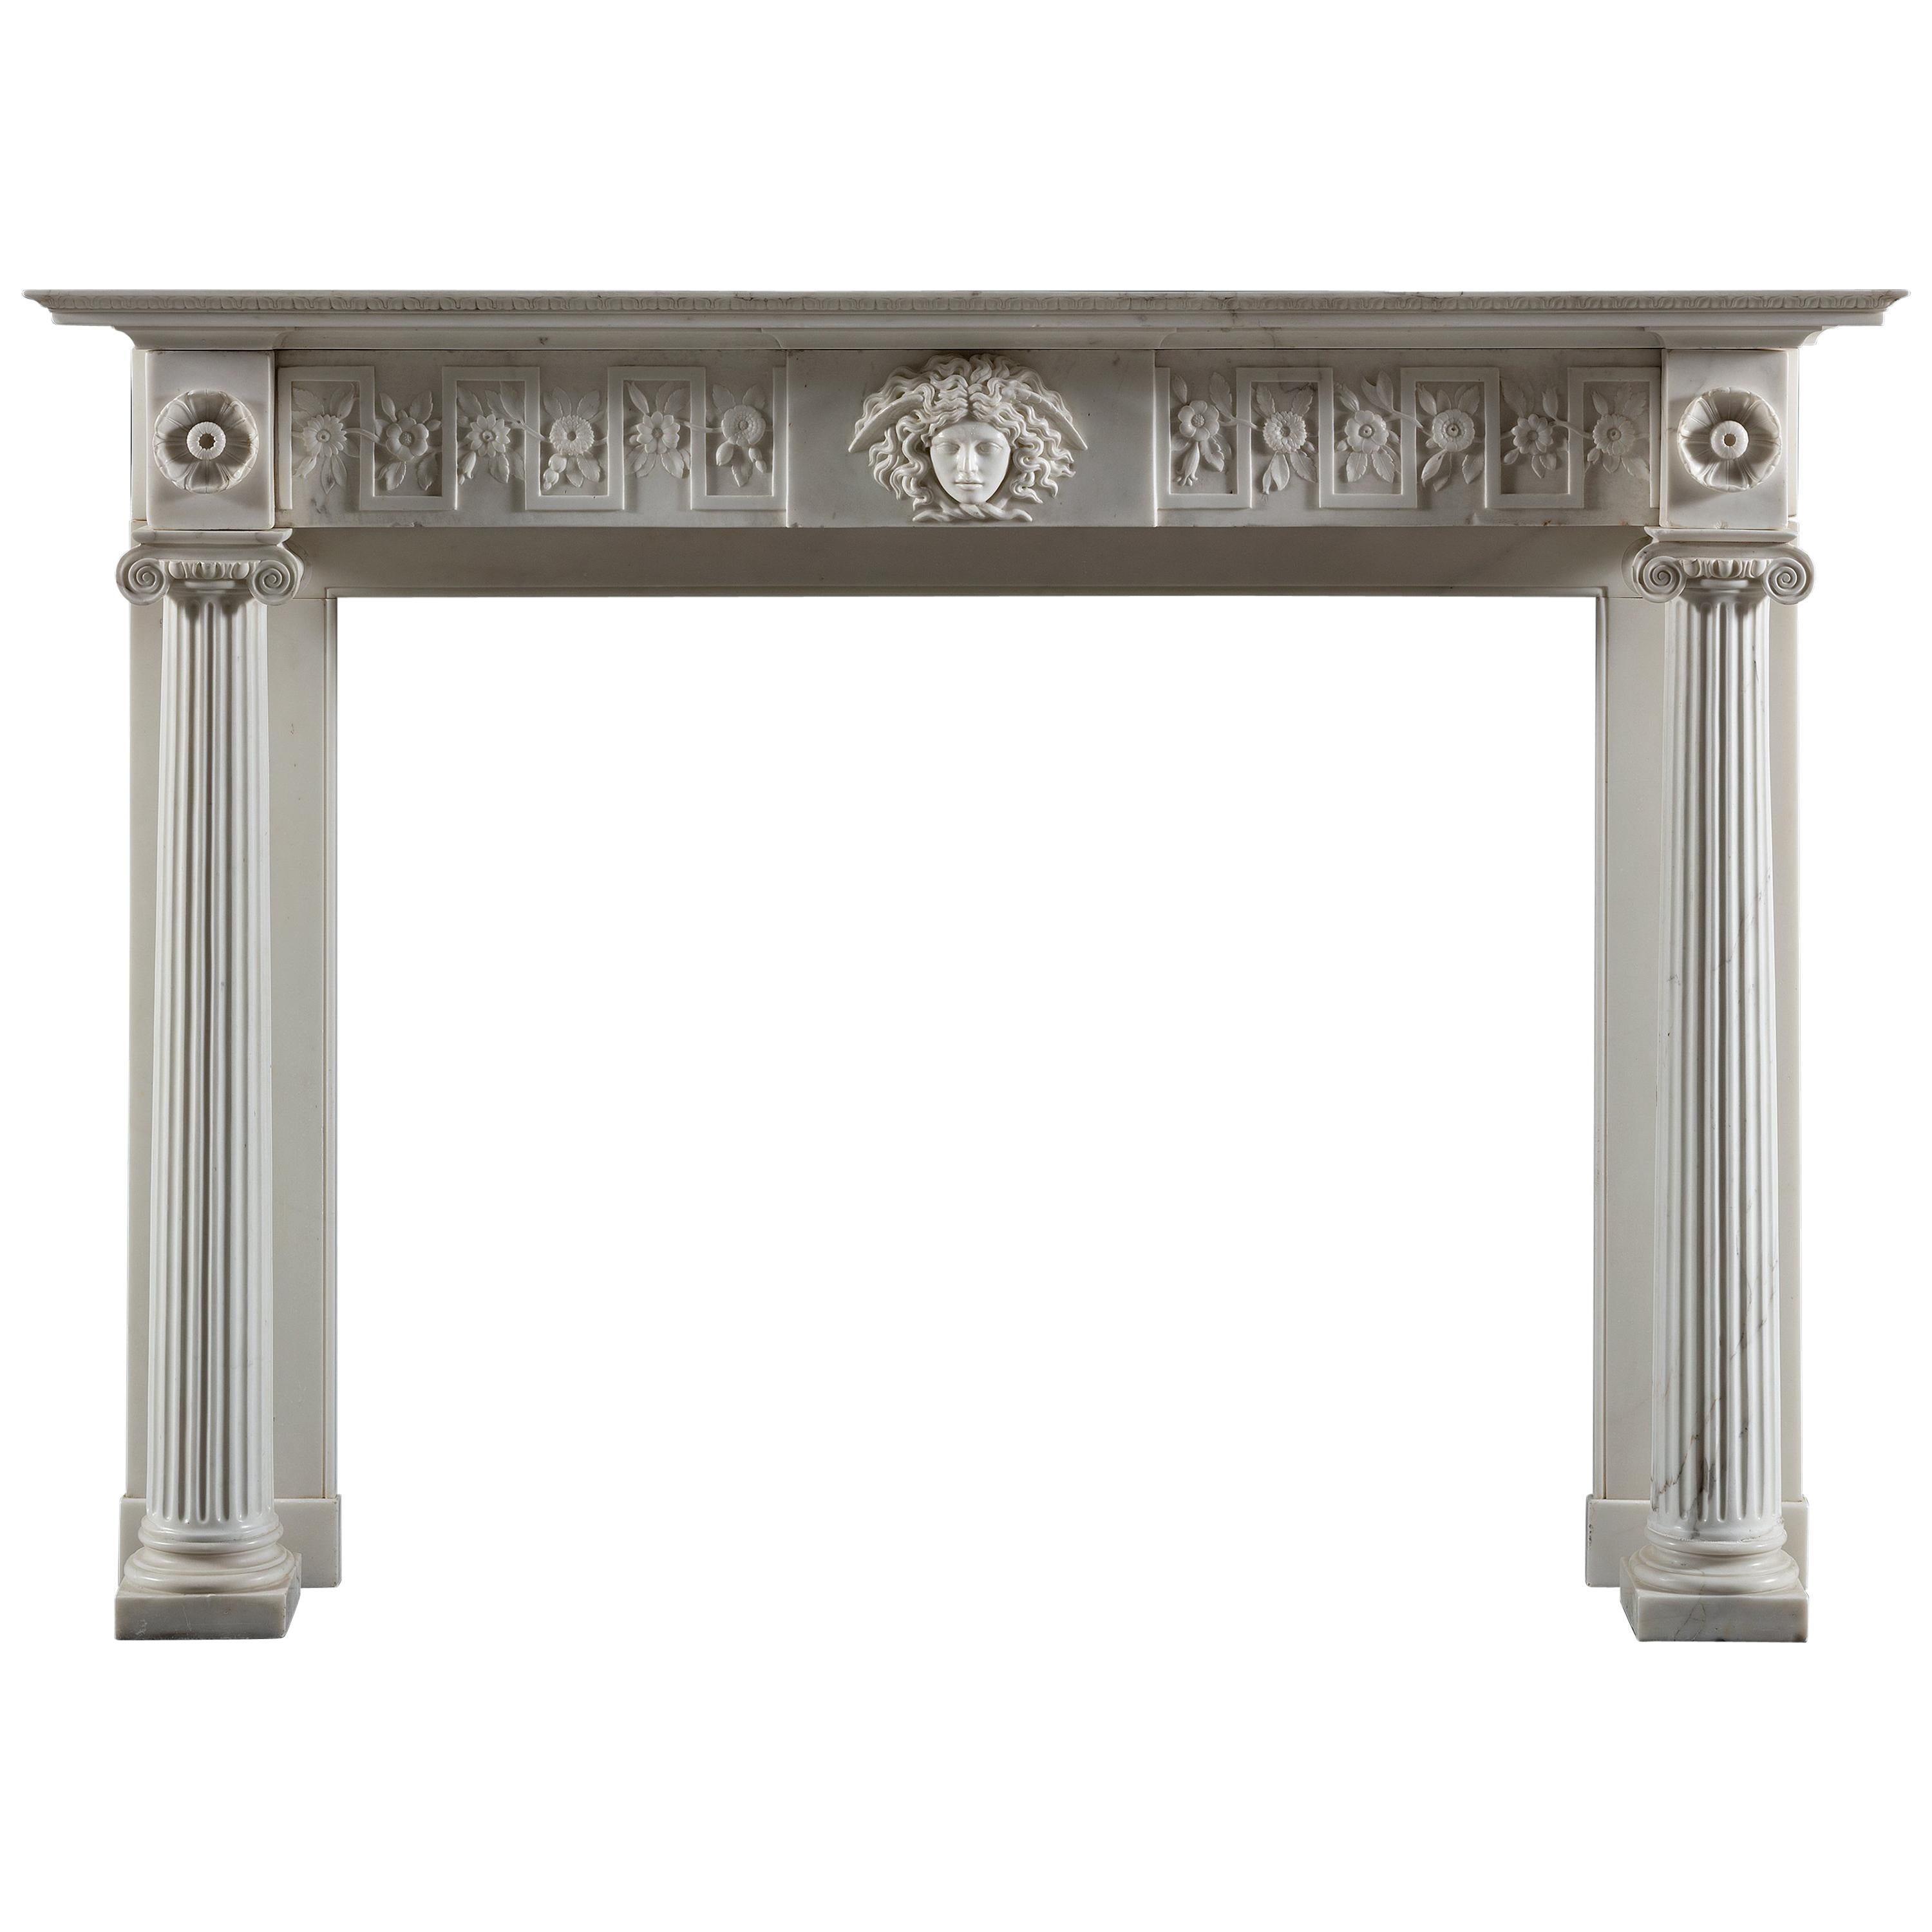 Regency Period, Neoclassical Column Fireplace in White Statuary Marble